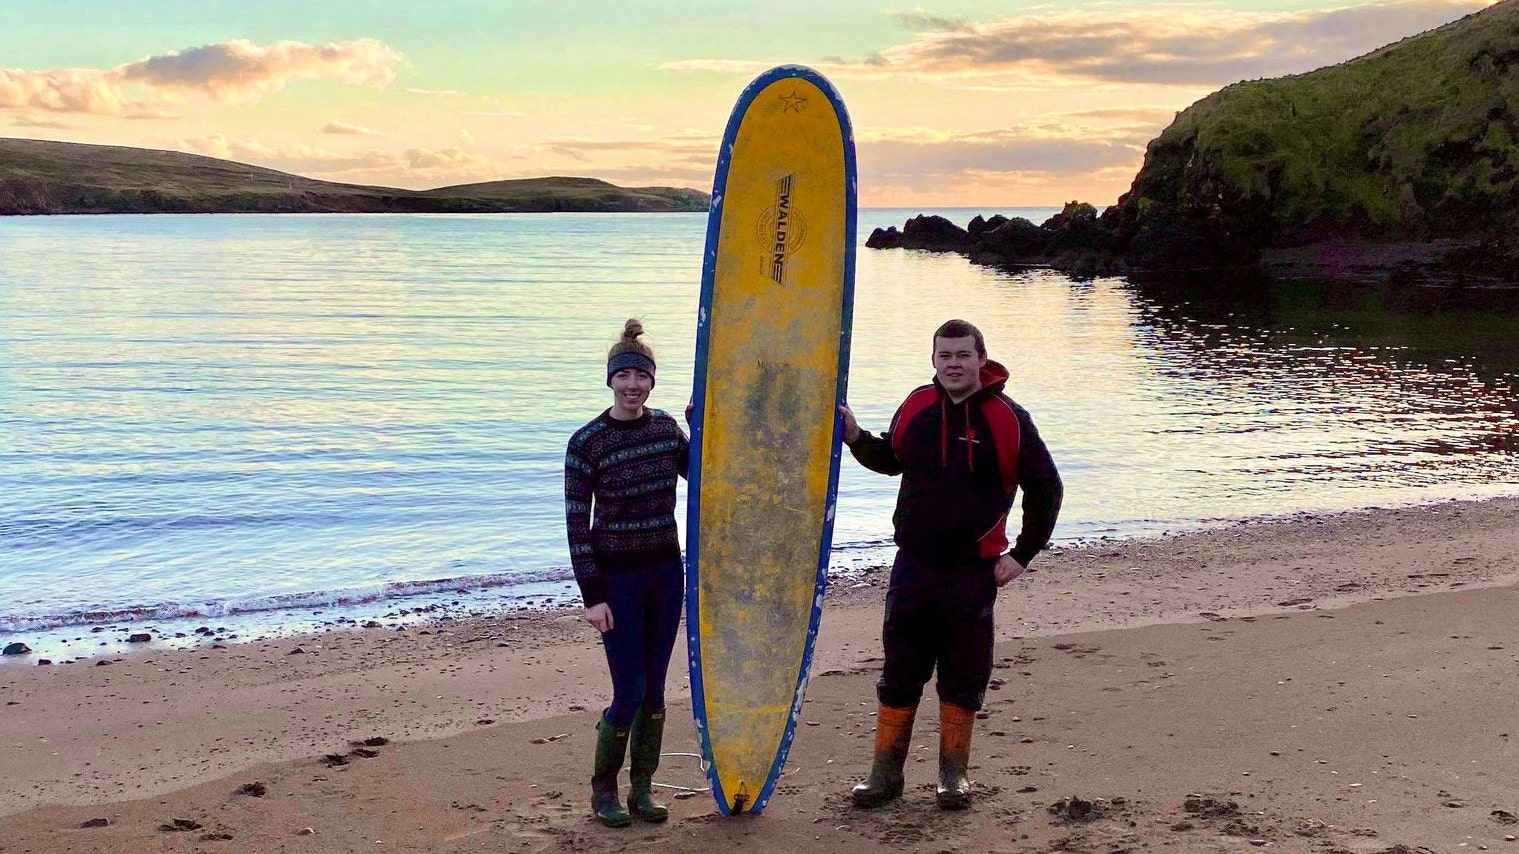 The UK man’s lost surfboard returned after floating 400 miles to the Shetland Islands